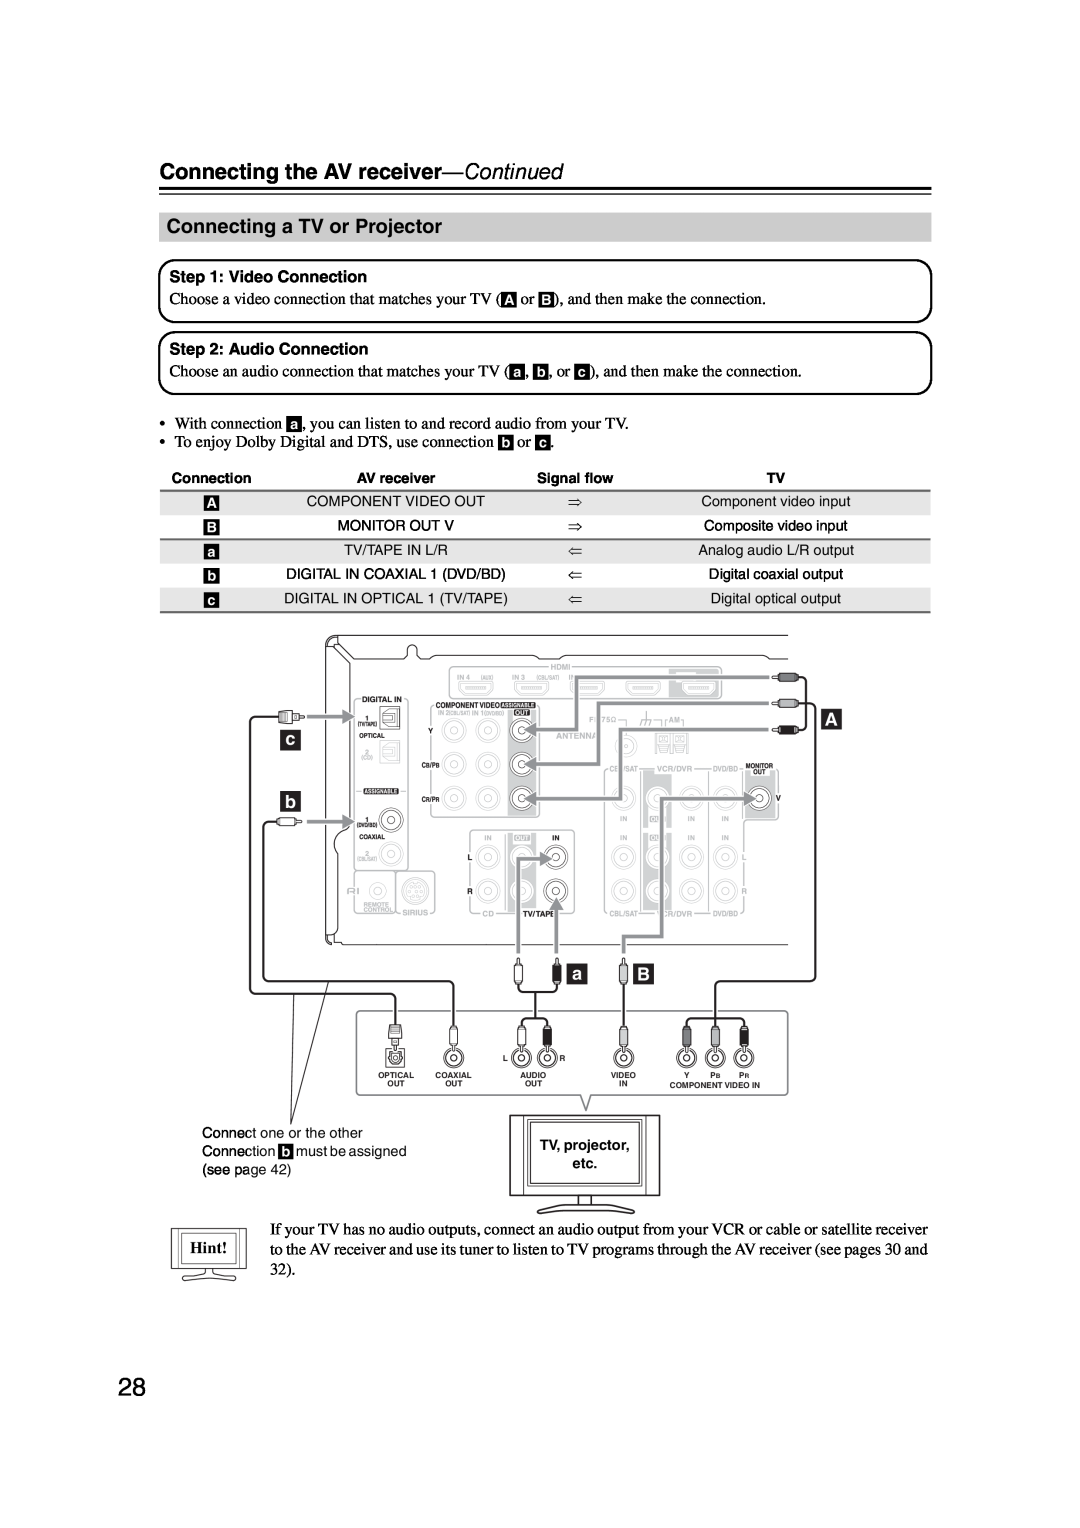 Onkyo 29344934 instruction manual Connecting a TV or Projector, Connecting the AV receiver—Continued, Hint 